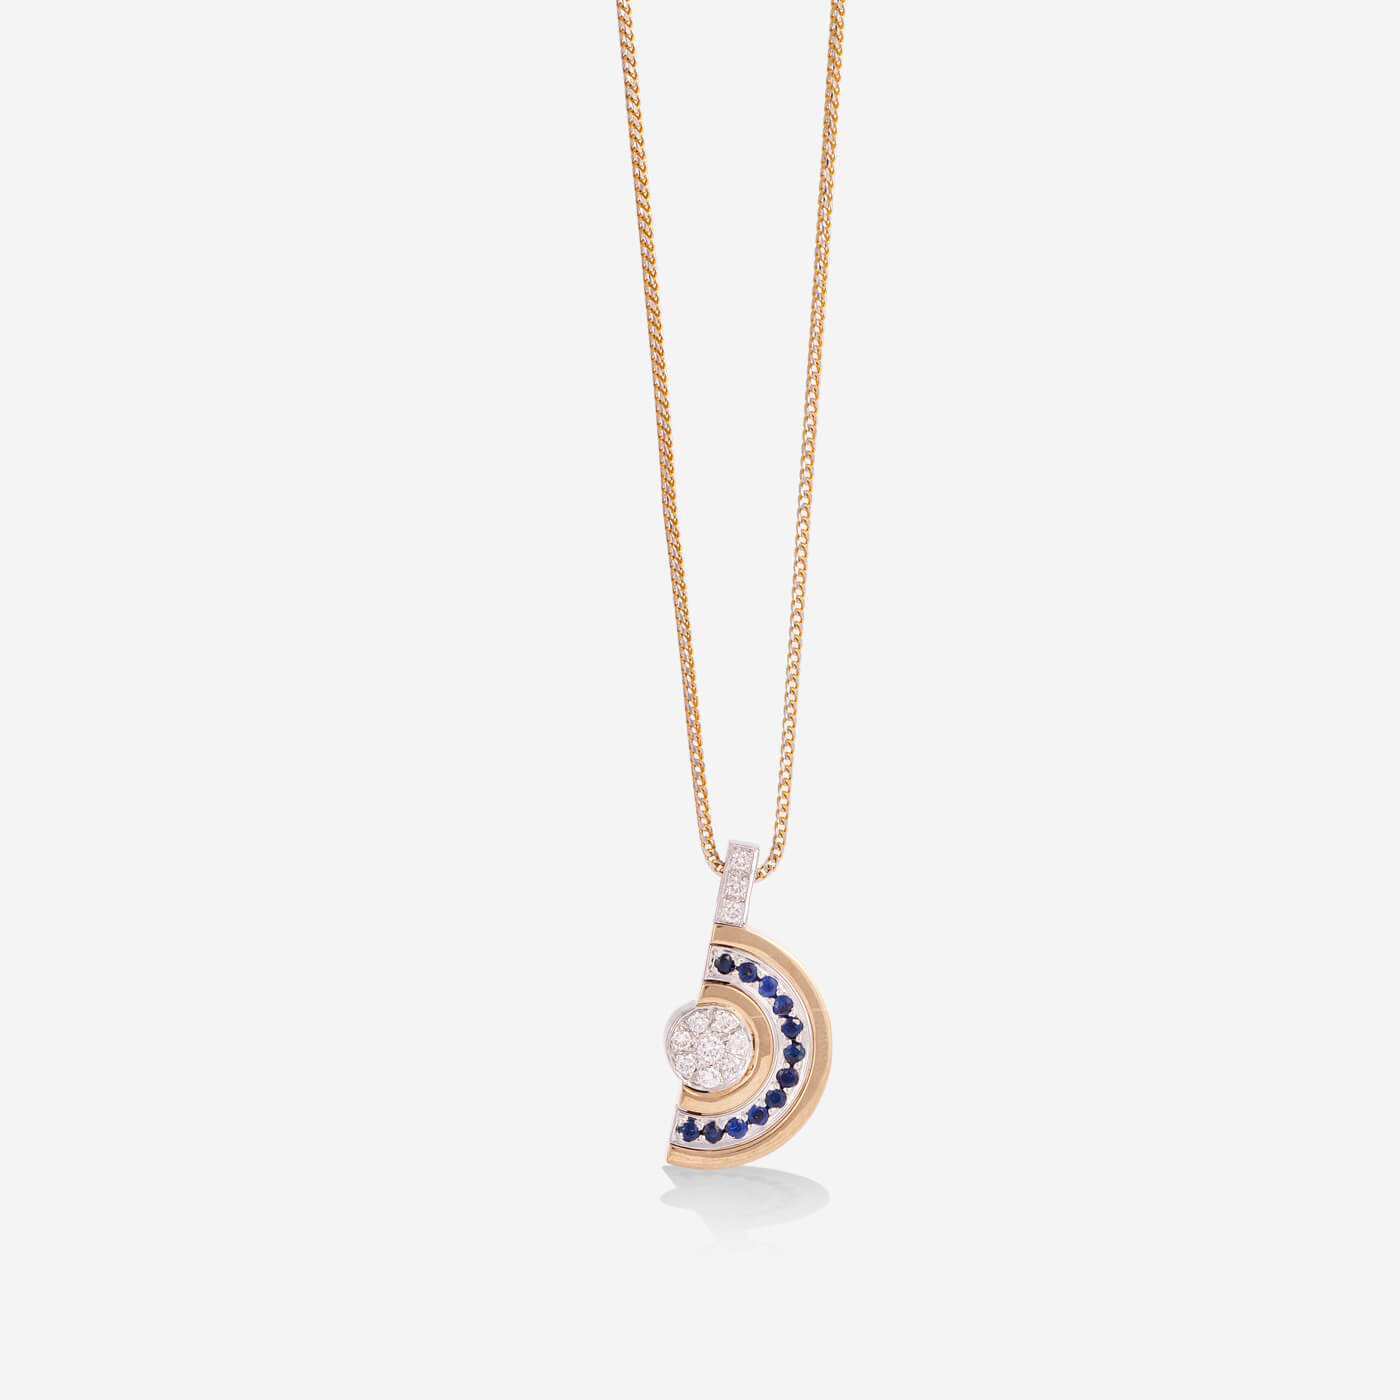 Multi Functional Full & Half Moon Yellow Gold Sapphire With Diamonds Necklace - Ref: RG03036